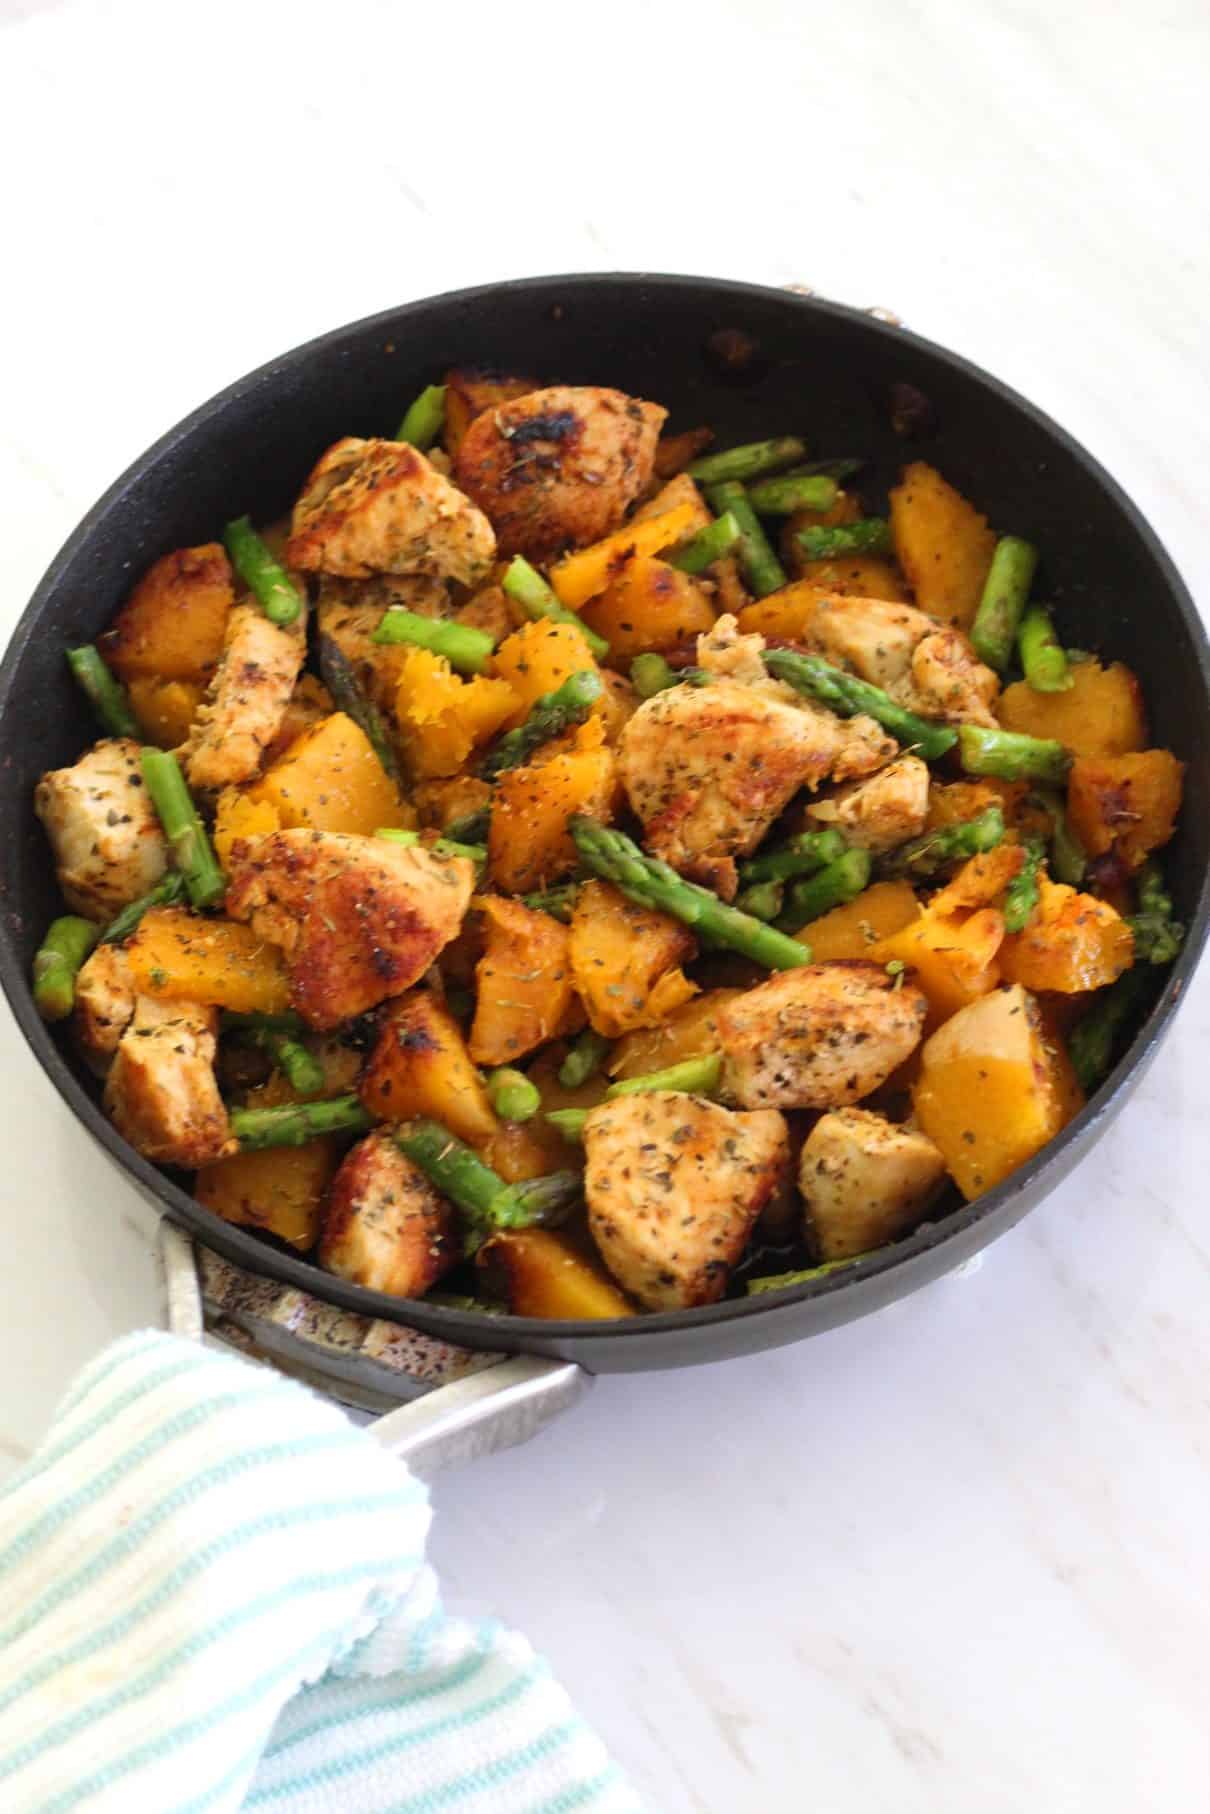 A skillet with cooked dinner: chicken, butternut squash and asparagus.